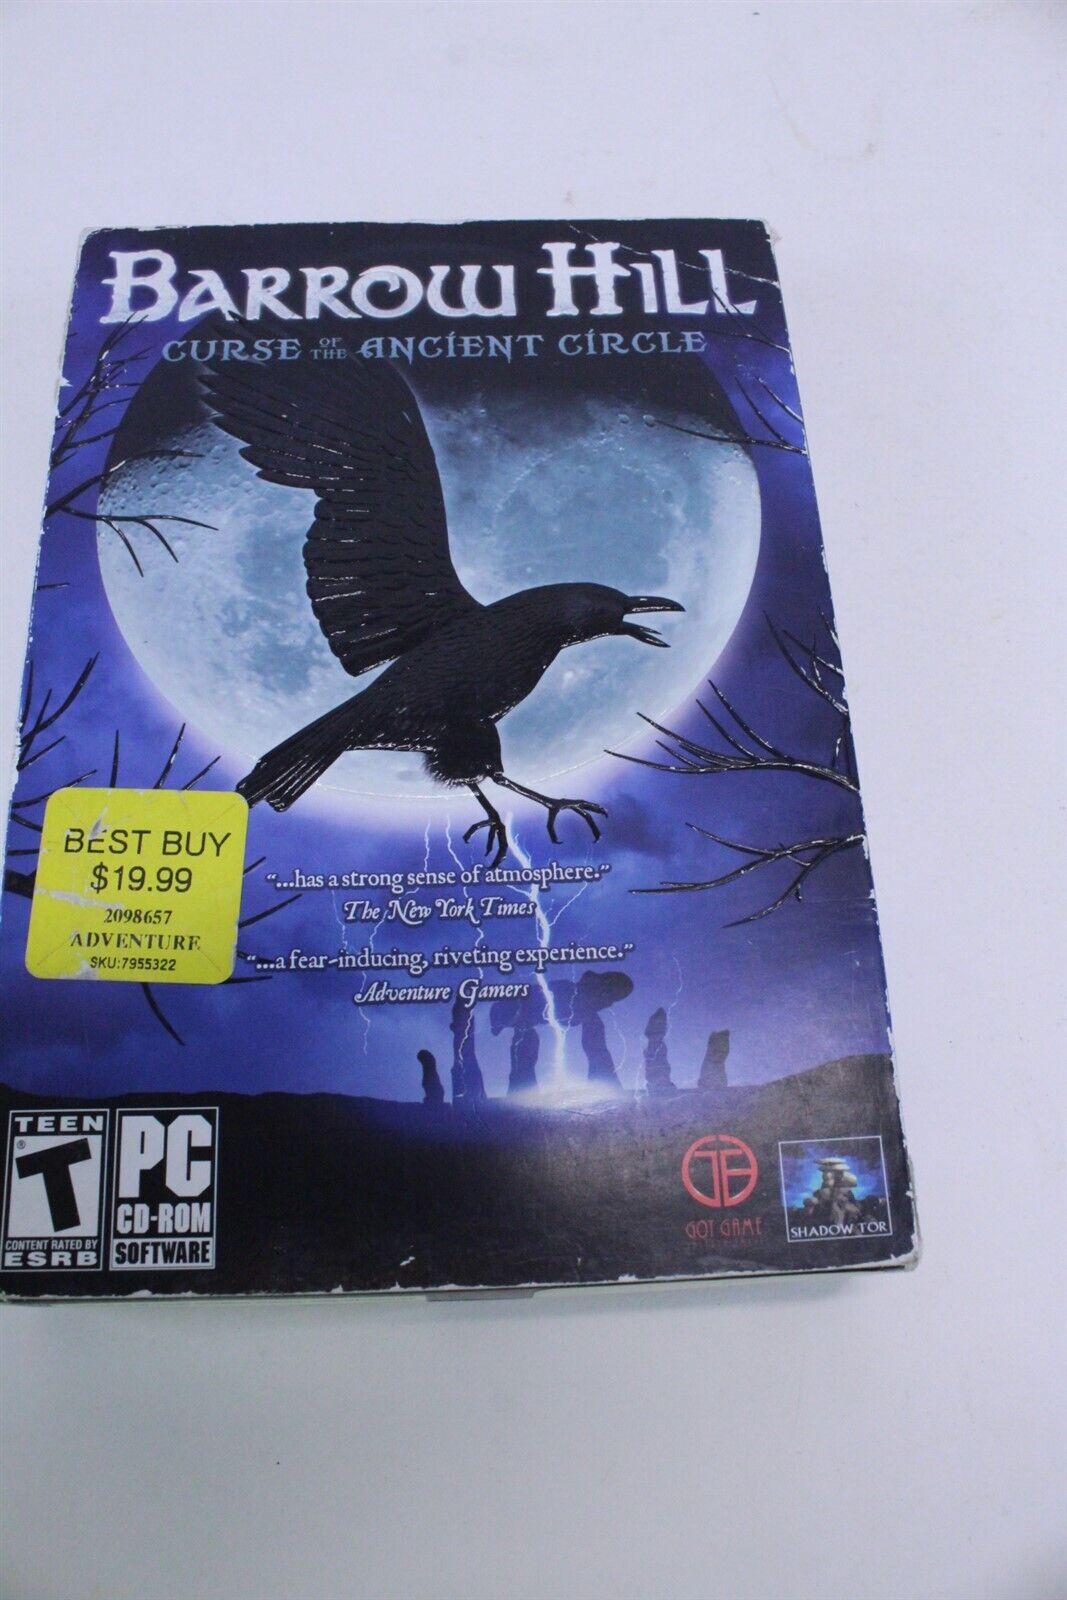 Barrow Hill Curse of the Ancient Circle PC Software Rated Teen